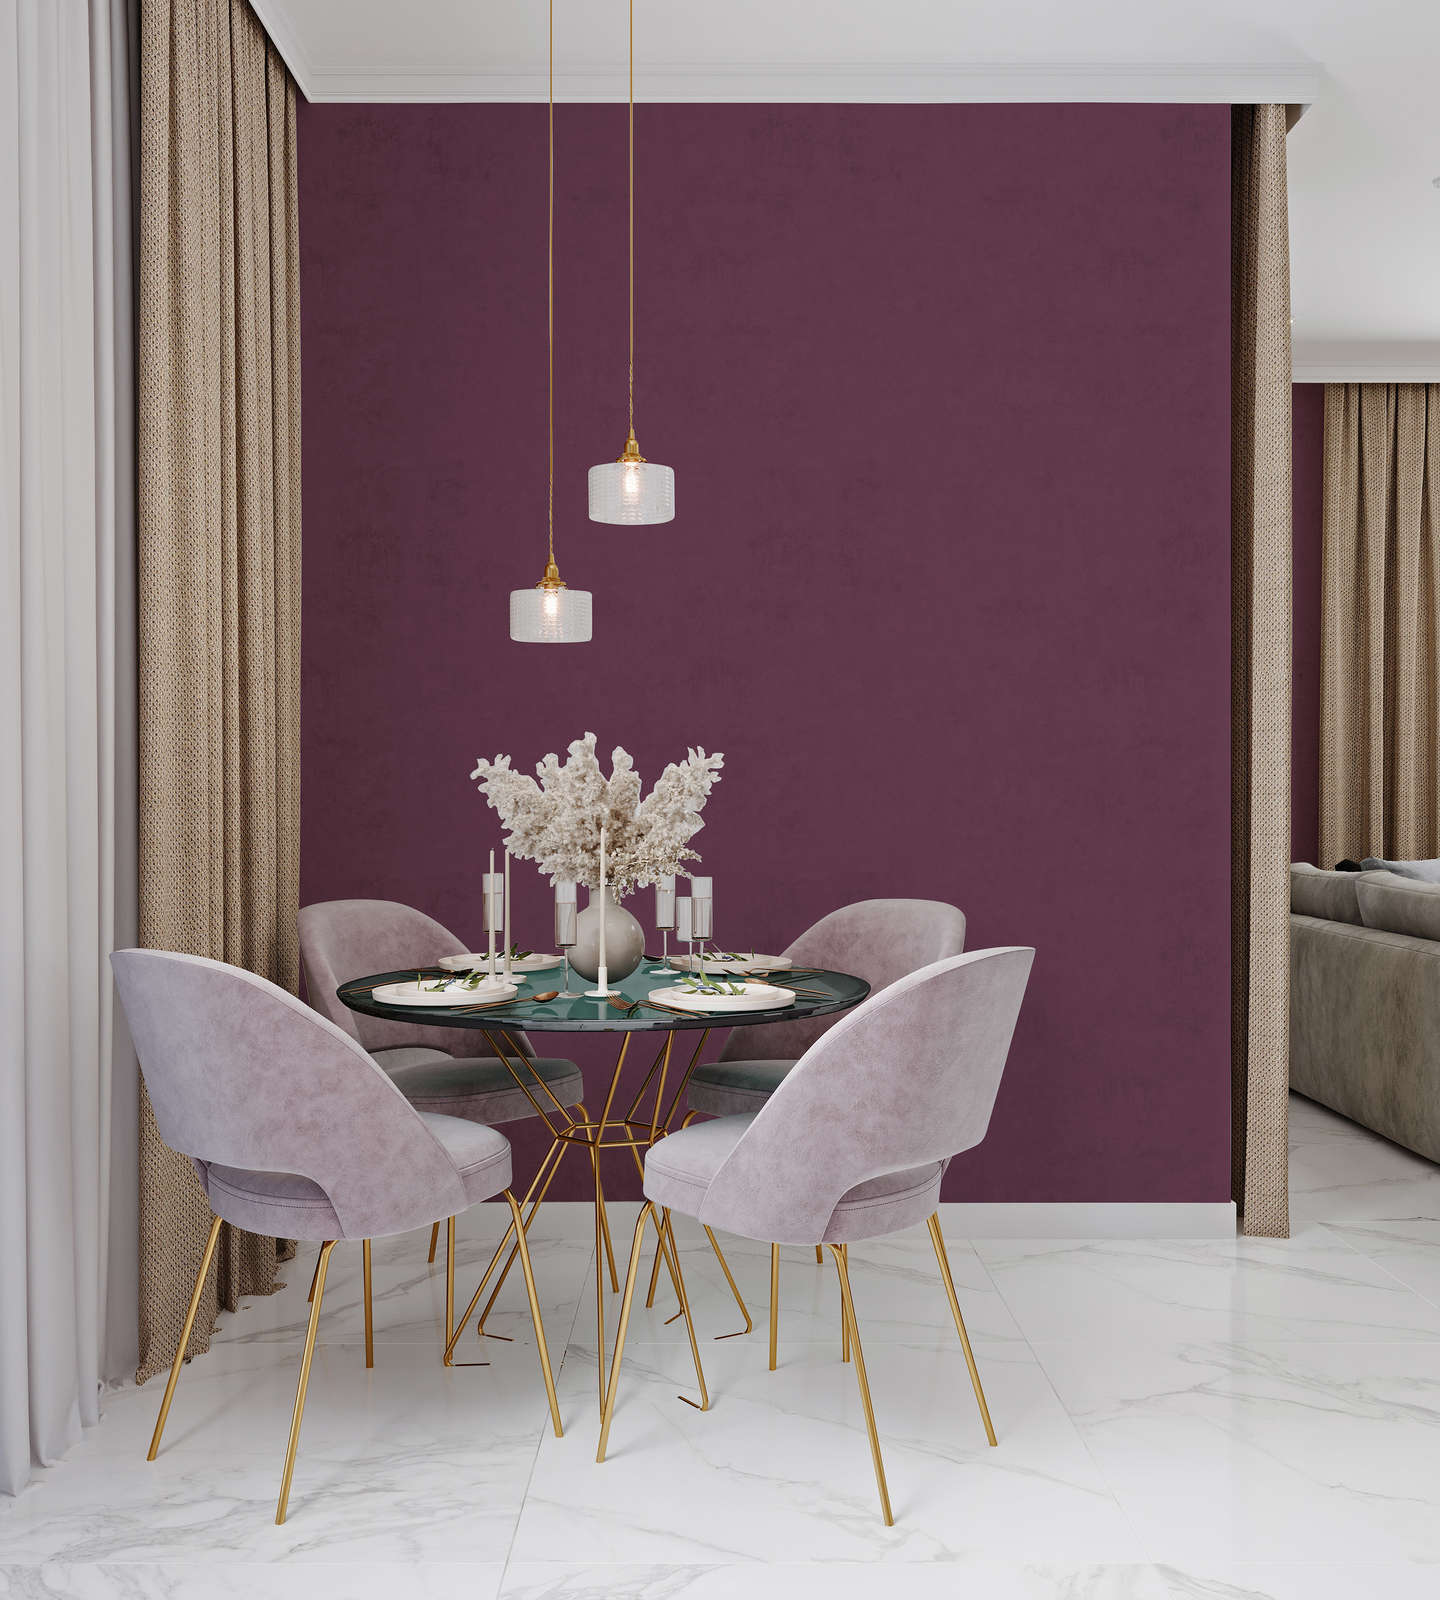             Premium Wall Paint strong berry »Beautiful Berry« NW212 – 5 litre
        